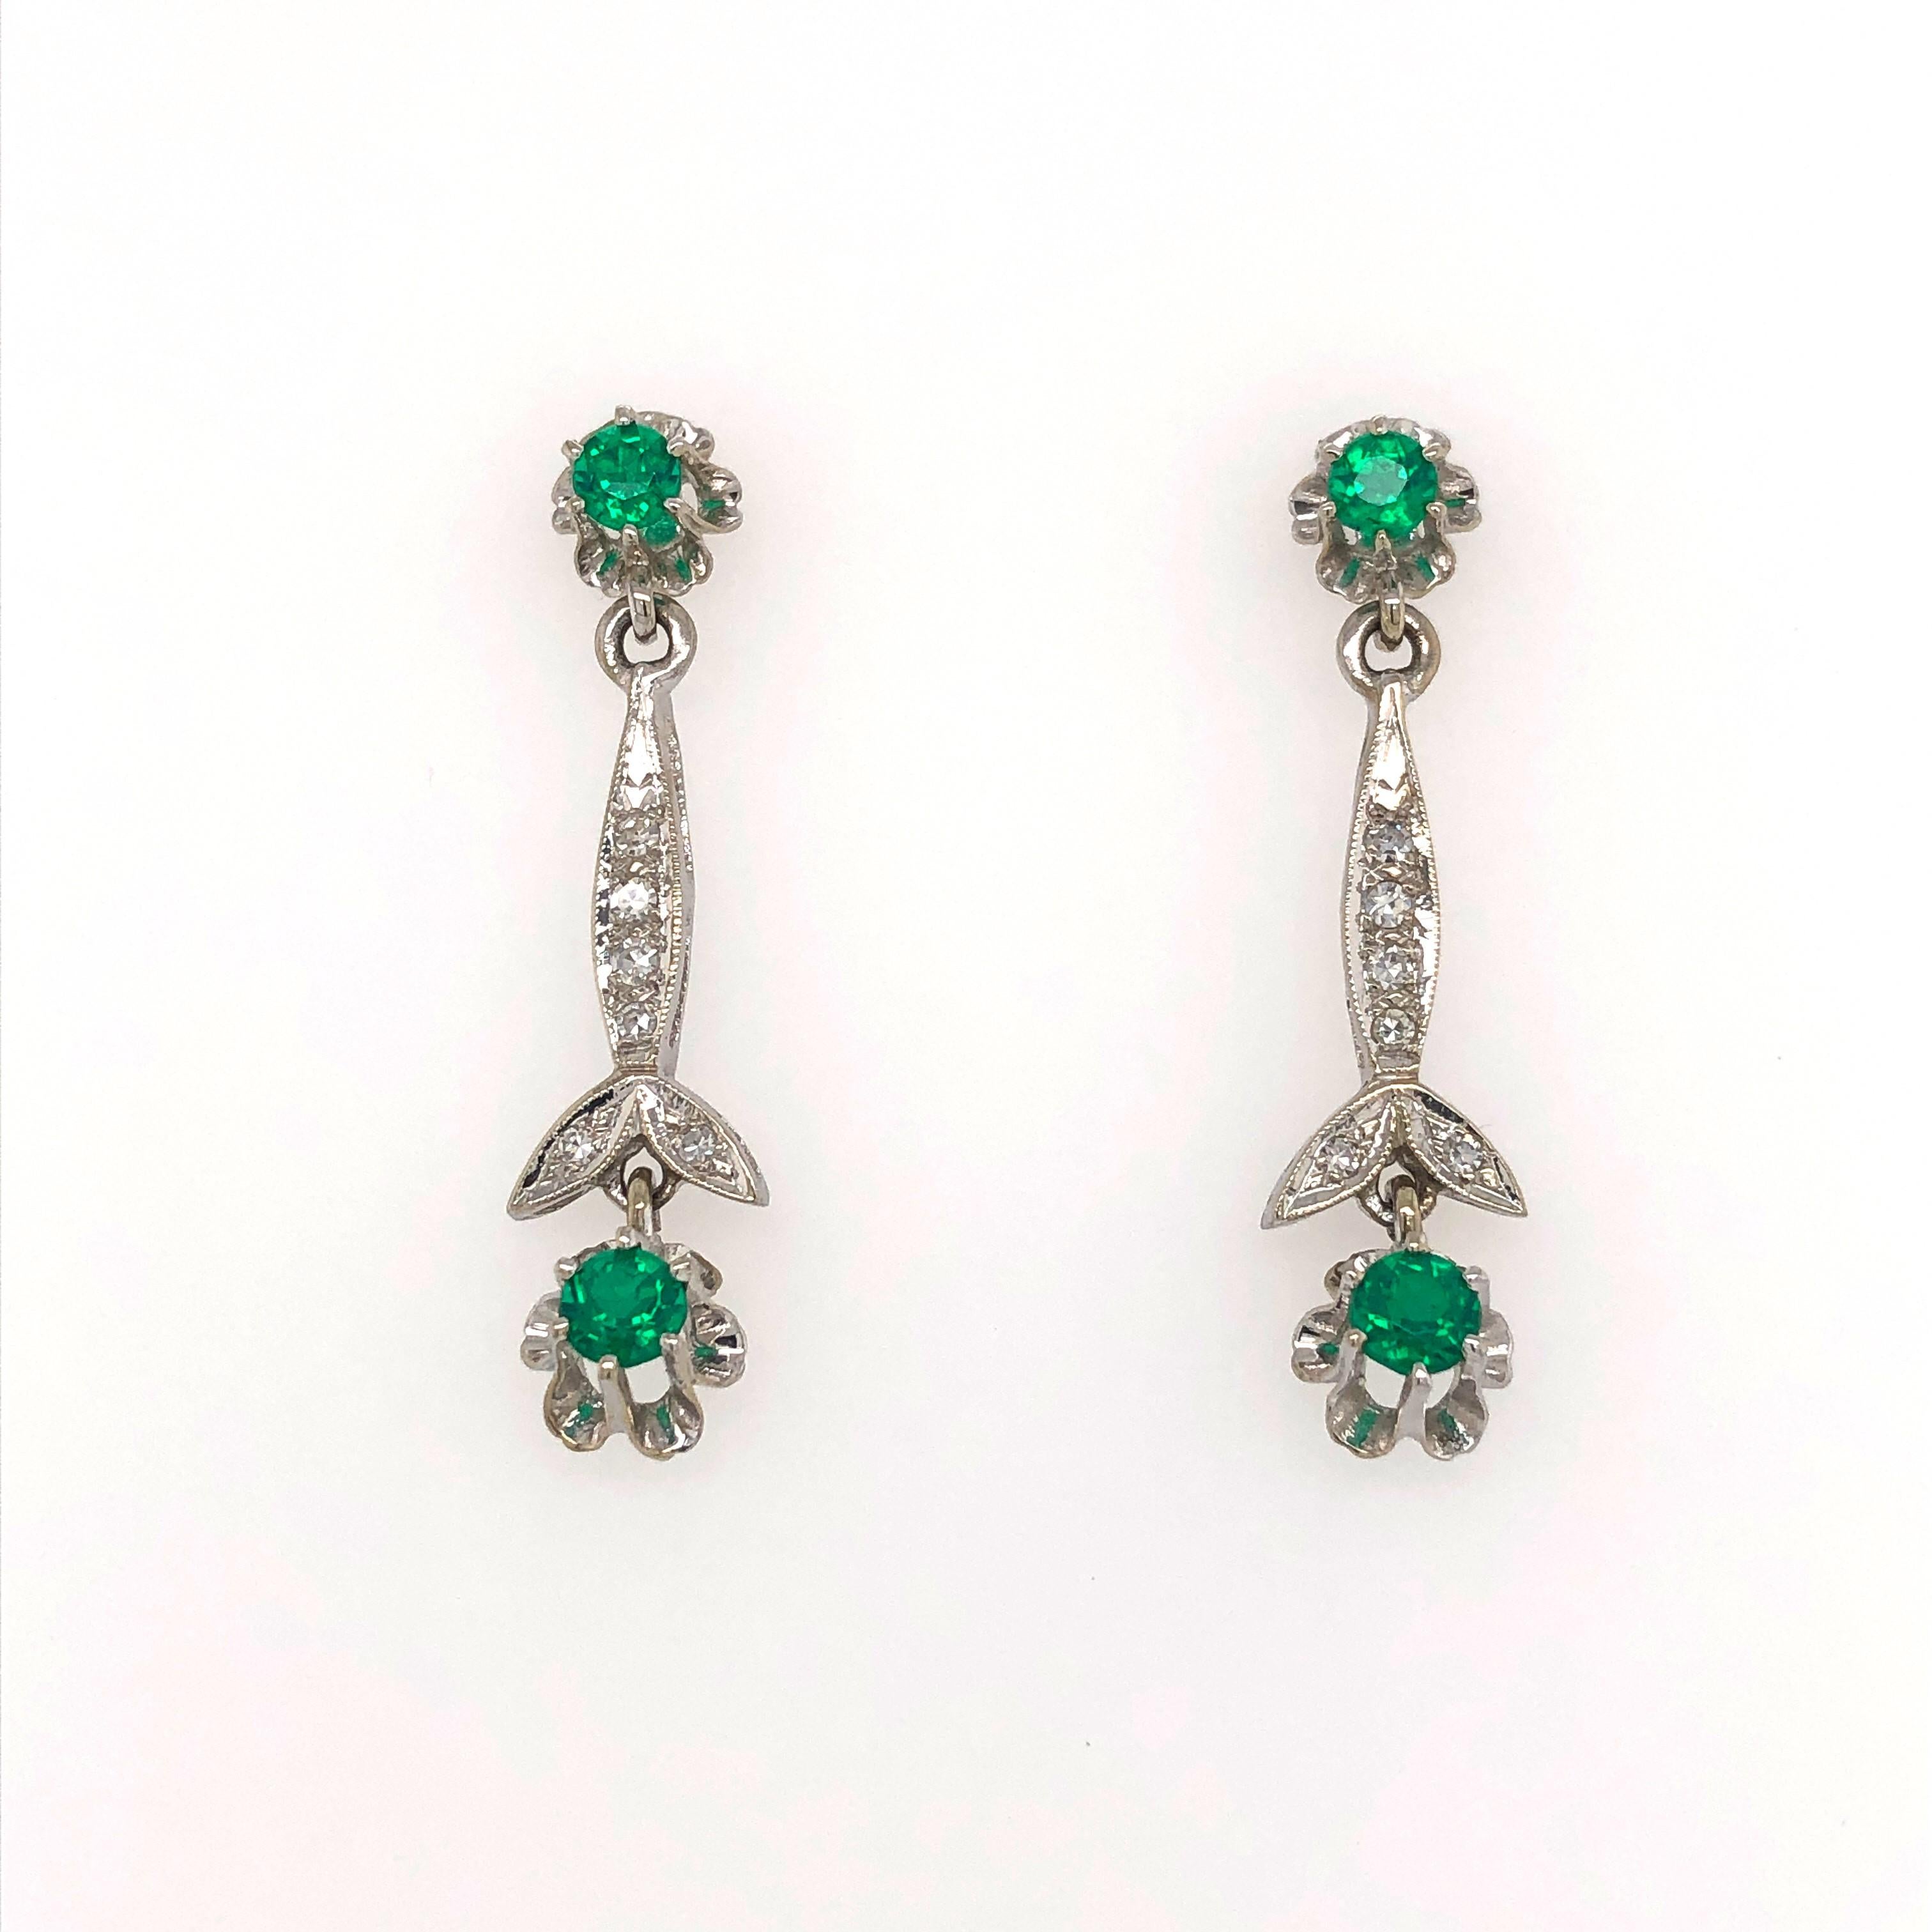 Flirty drop earrings of fourteen carat white gold with diamond accented floral stems display vivid green beryl floral buds and studs. The four beryl doublet stones of .06 ct each are prong set giving dimension to the design. The drop is 1-1/4 inches